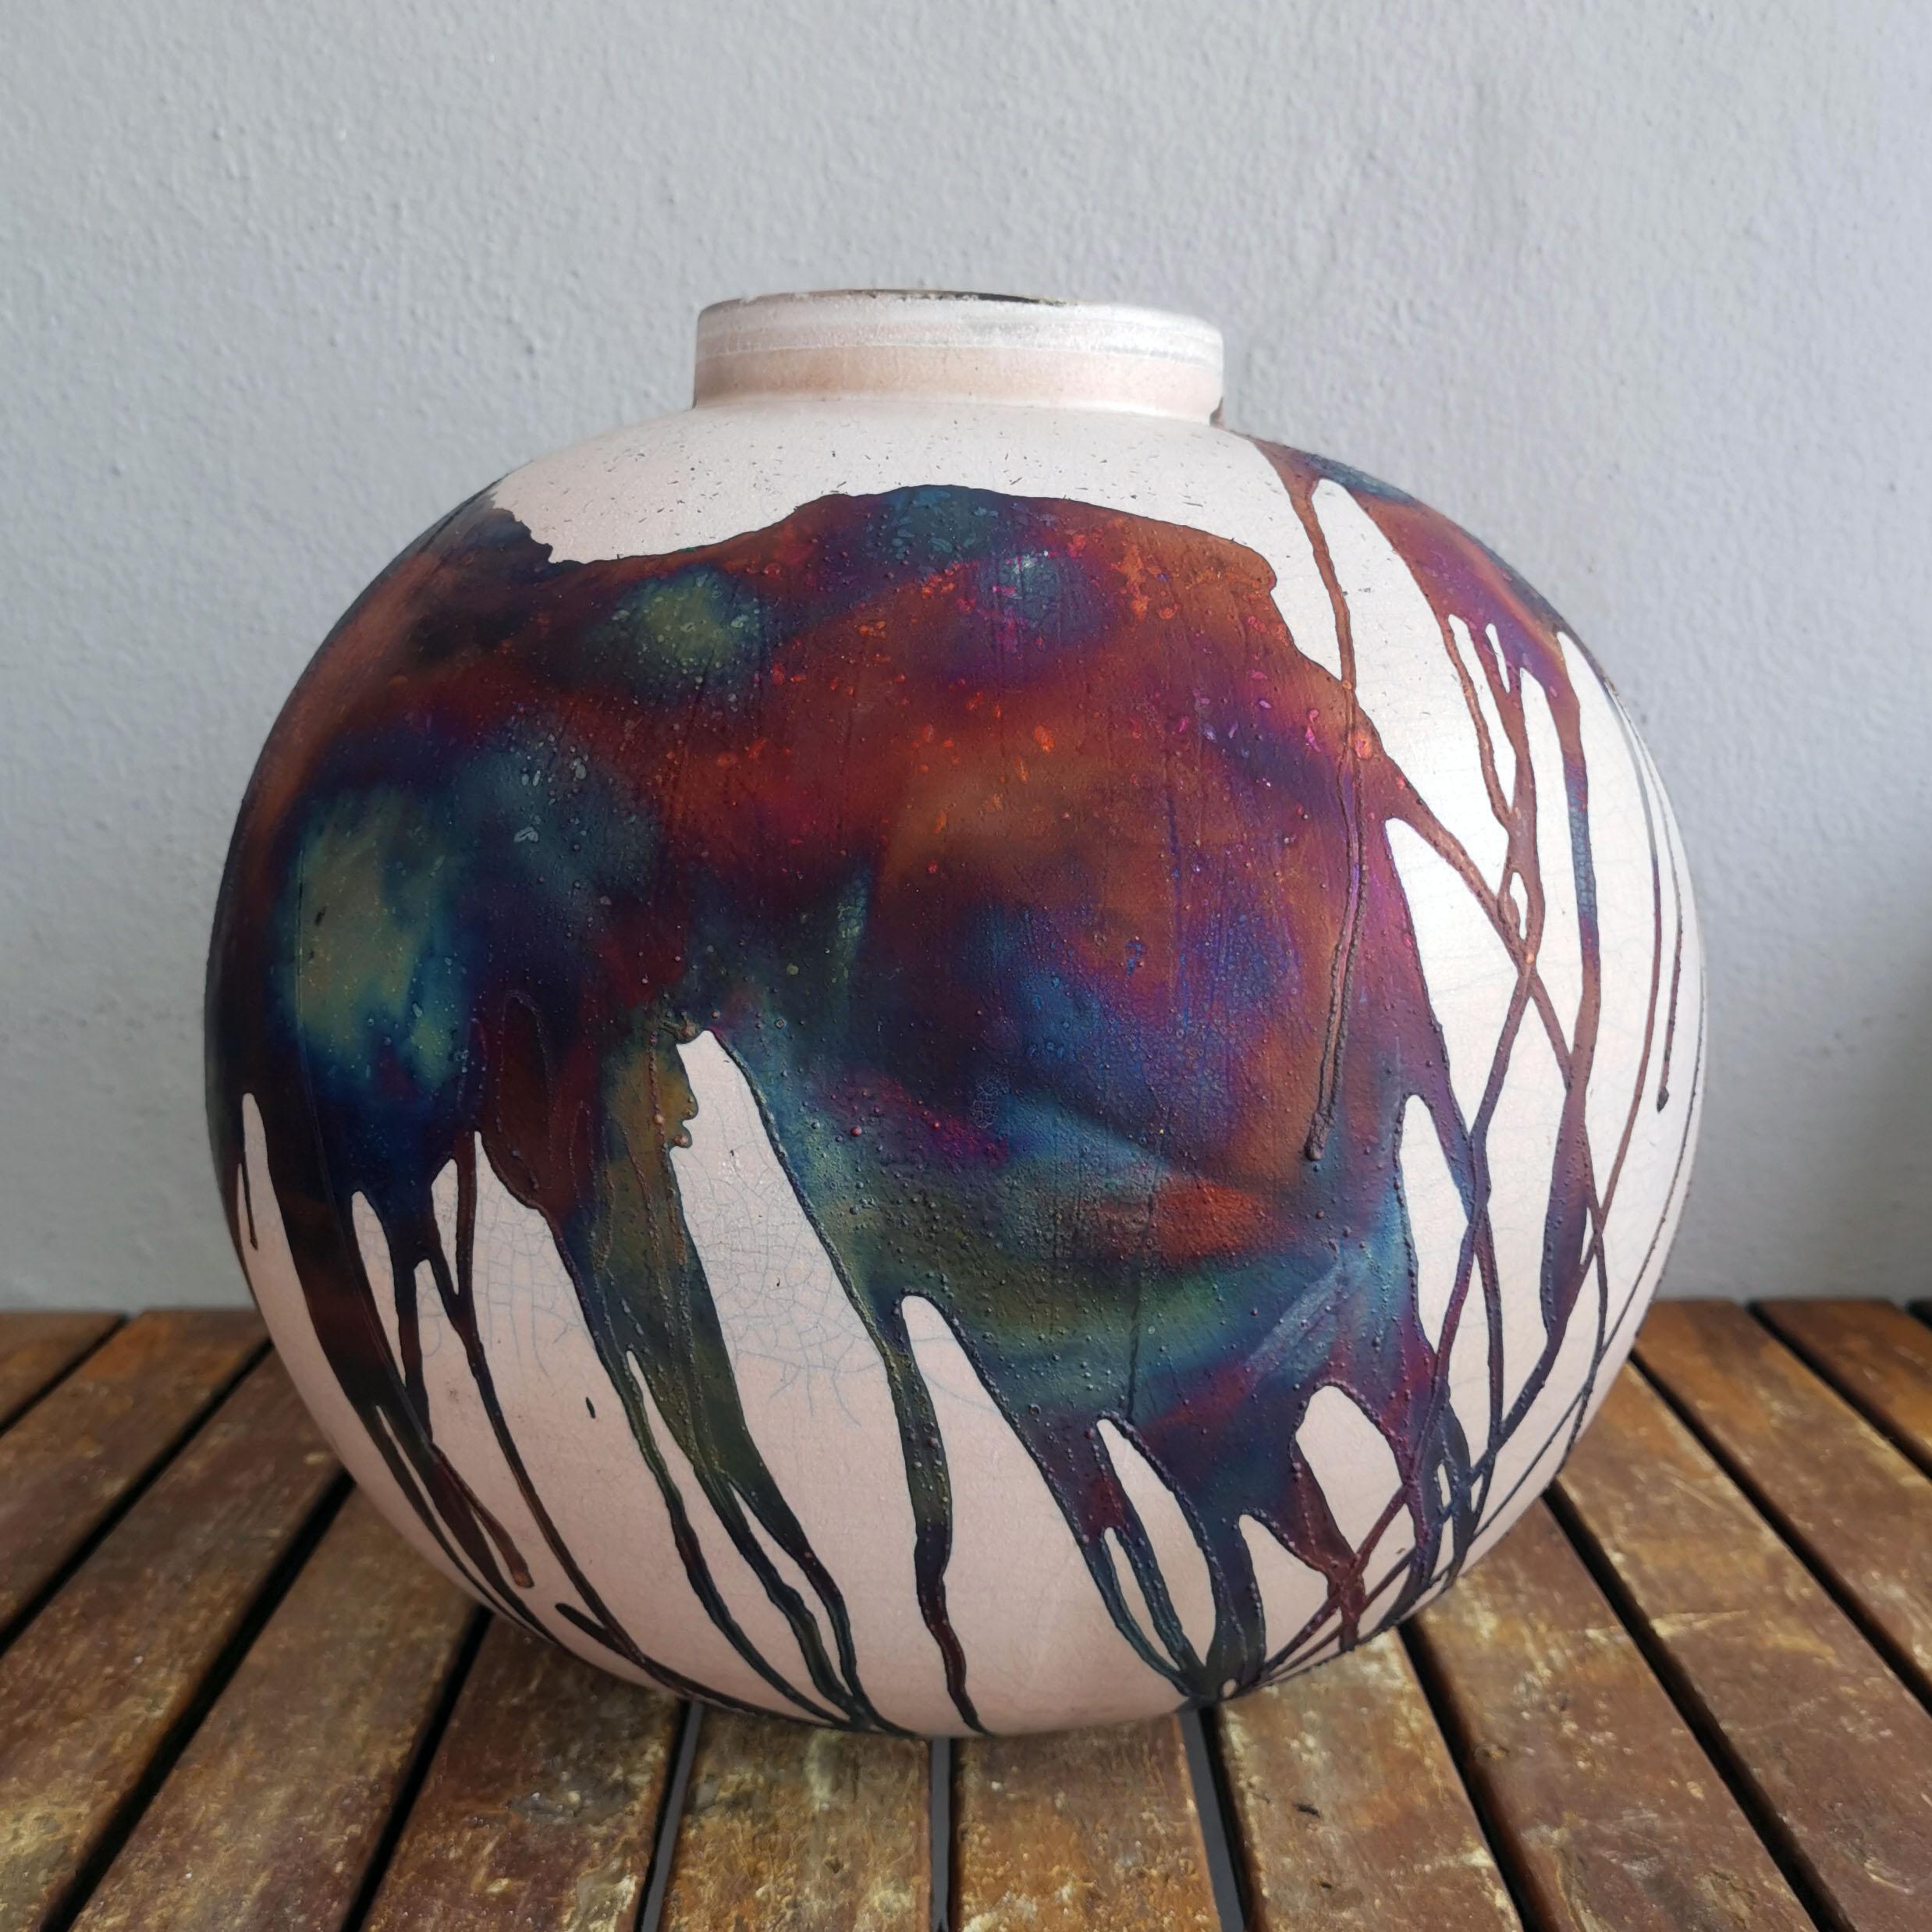 THIS IS A PRE-ORDER

A mesmerizing sight to behold as soon as the rainbow-like patinas catch your eye. This Globe XL Vase is a round, capacious piece produced using the Raku technique, resulting in a beautiful unpredictable finish. This vase would